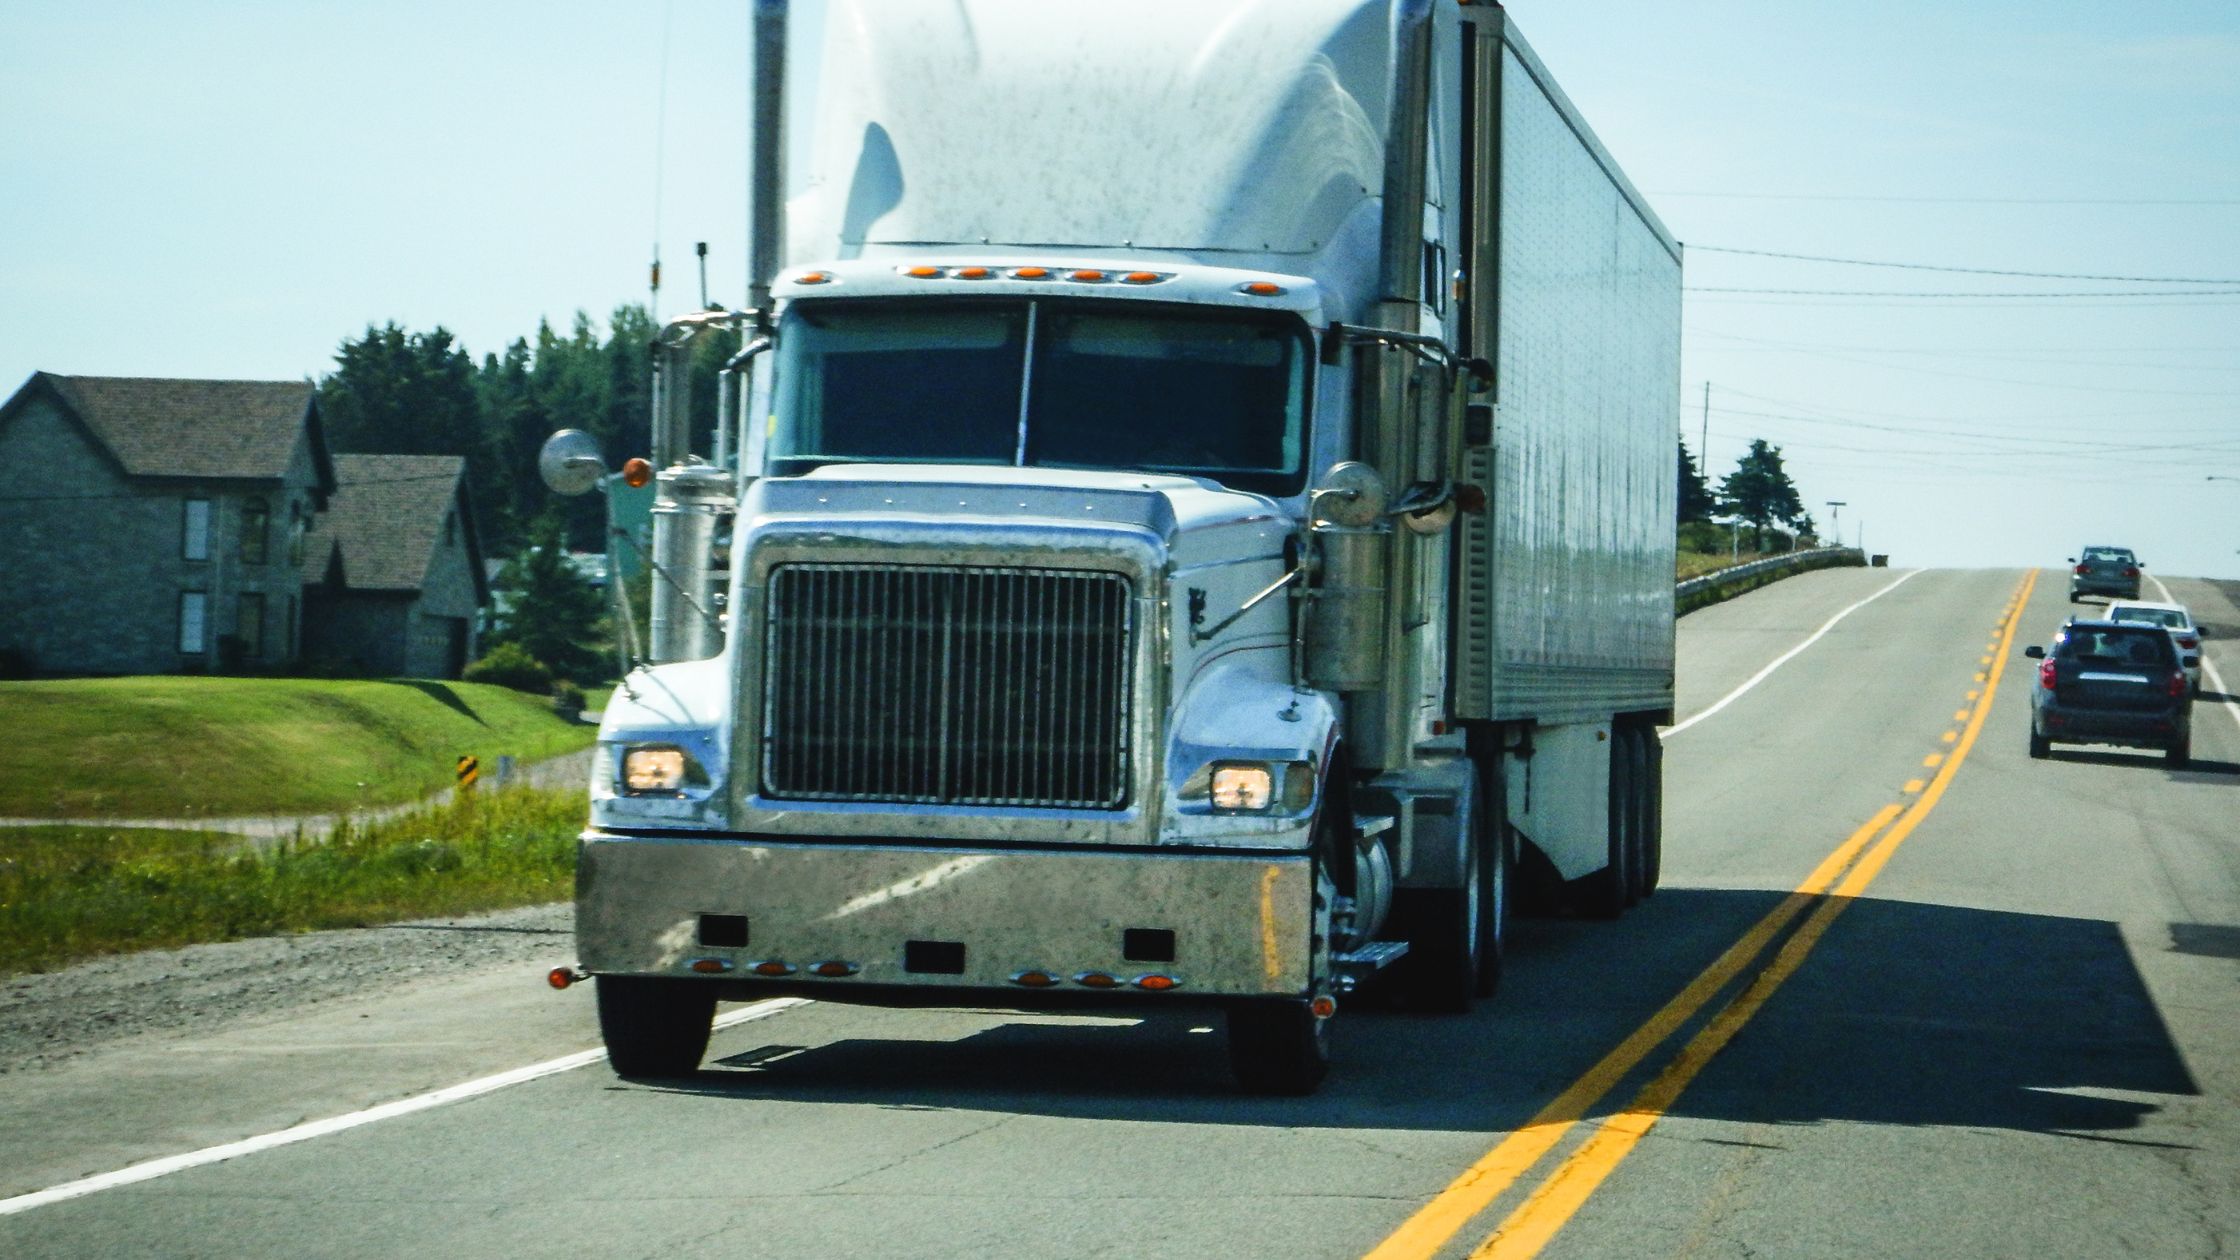 An image of a large semi-truck driving on one of the most dangerous trucking routes in Dallas, Texas, with other vehicles in close proximity on a sunny day, highlighting the importance of road safety in areas with heavy truck traffic.